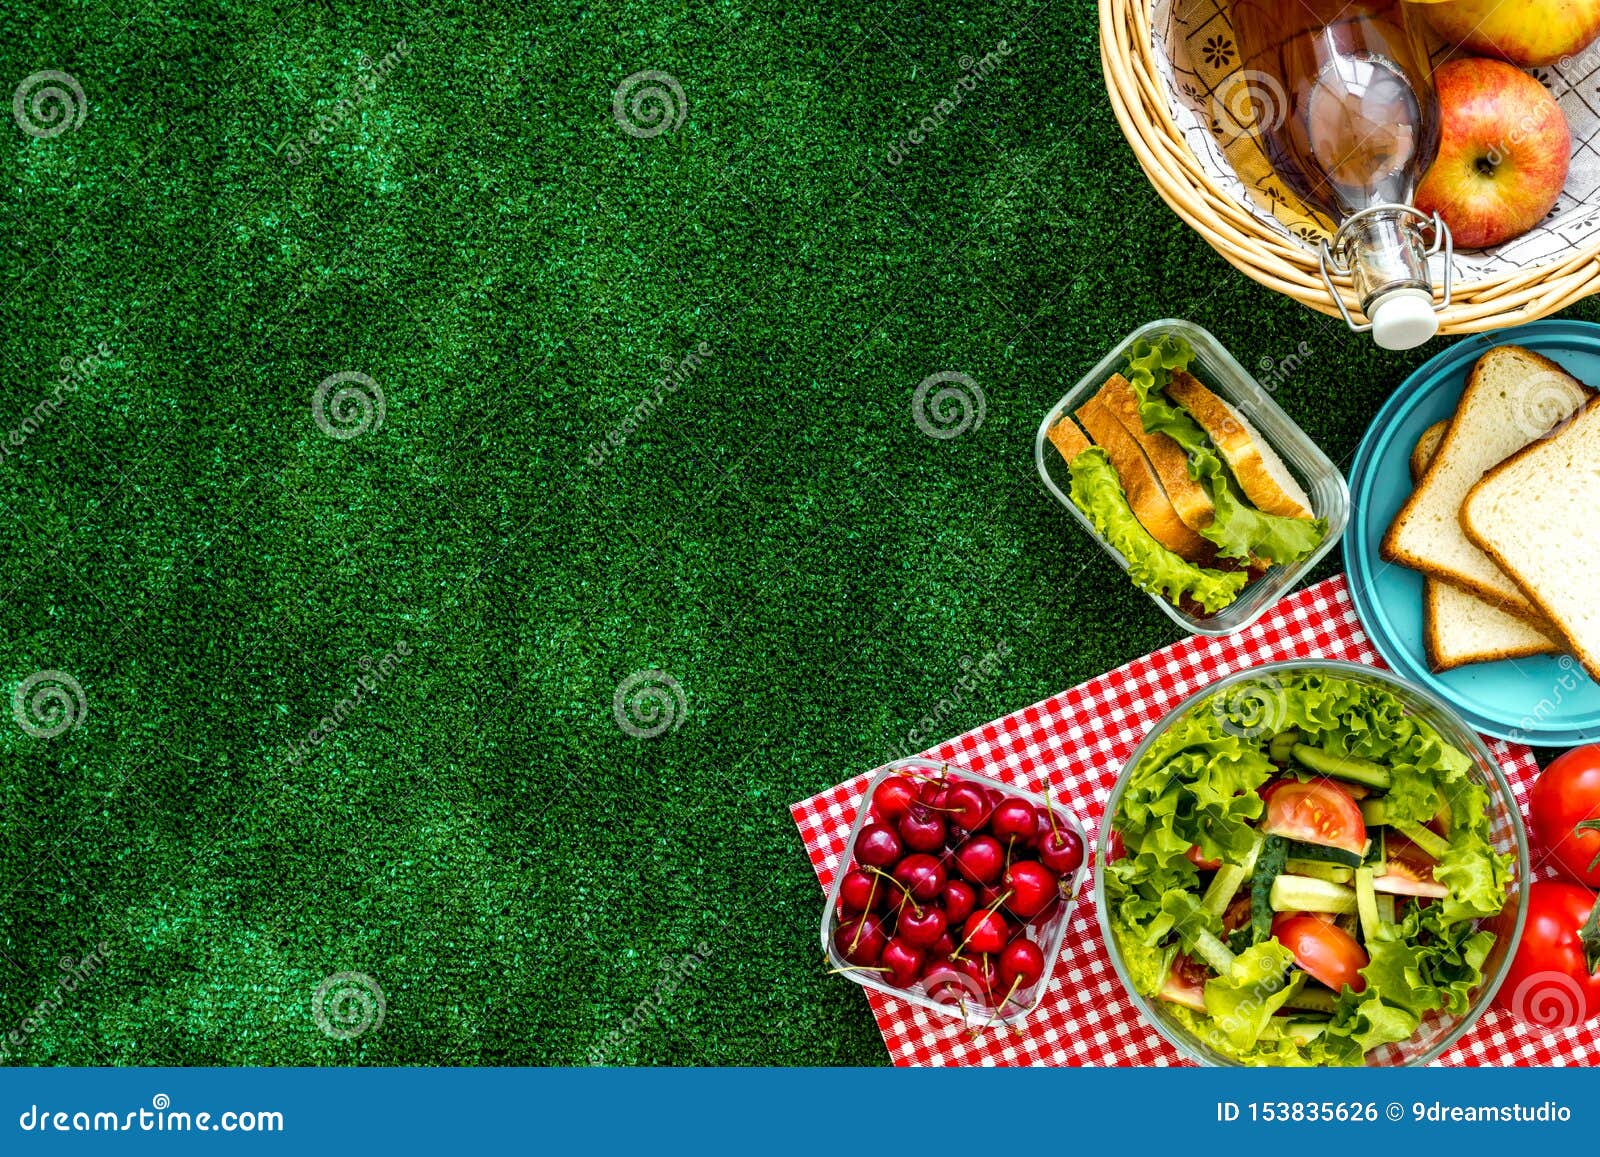 Download 4 234 Mockup Salad Photos Free Royalty Free Stock Photos From Dreamstime